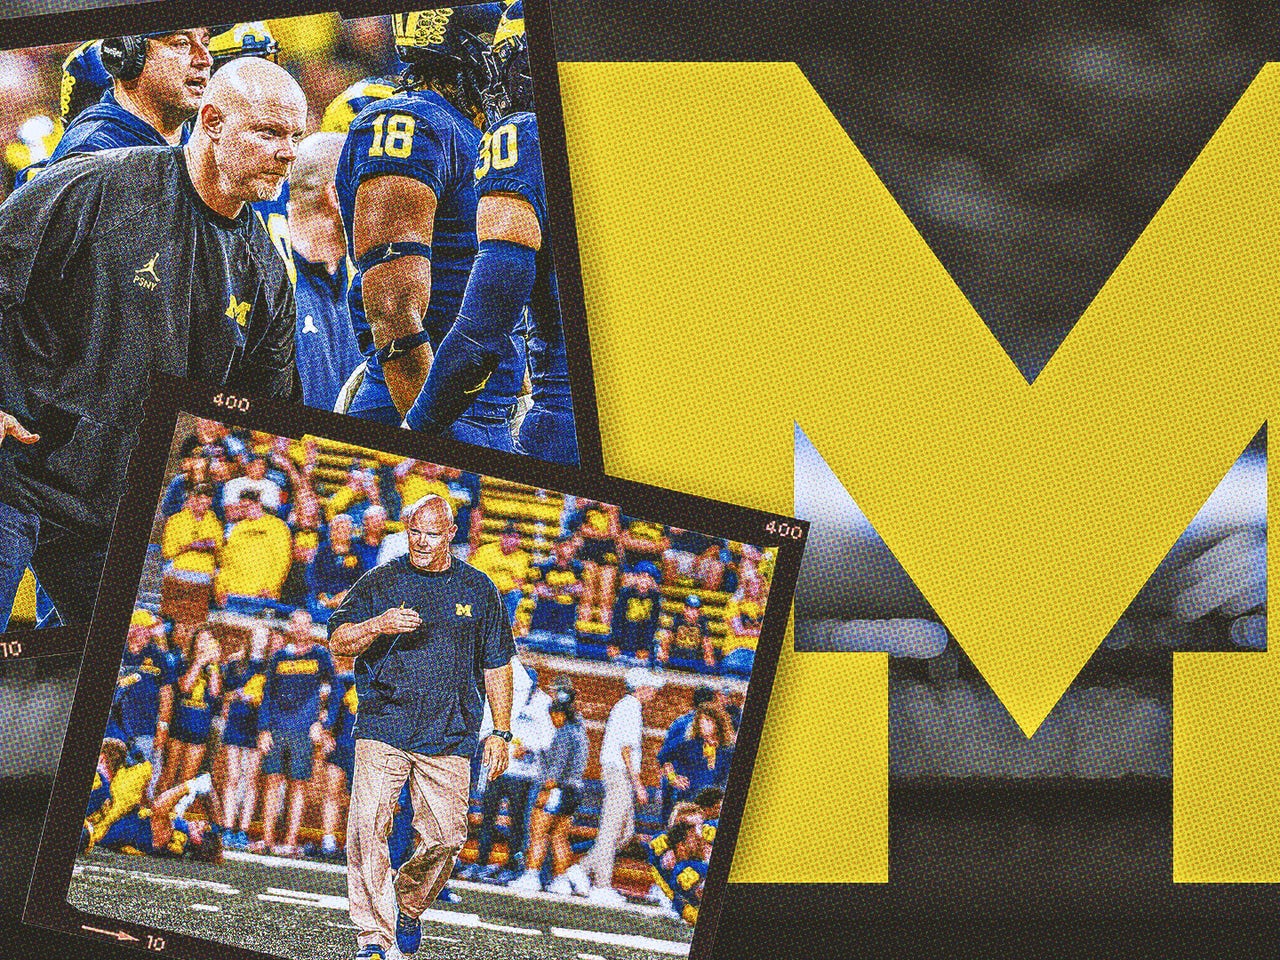 Why a strength coach is Michigan football's ultimate weapon